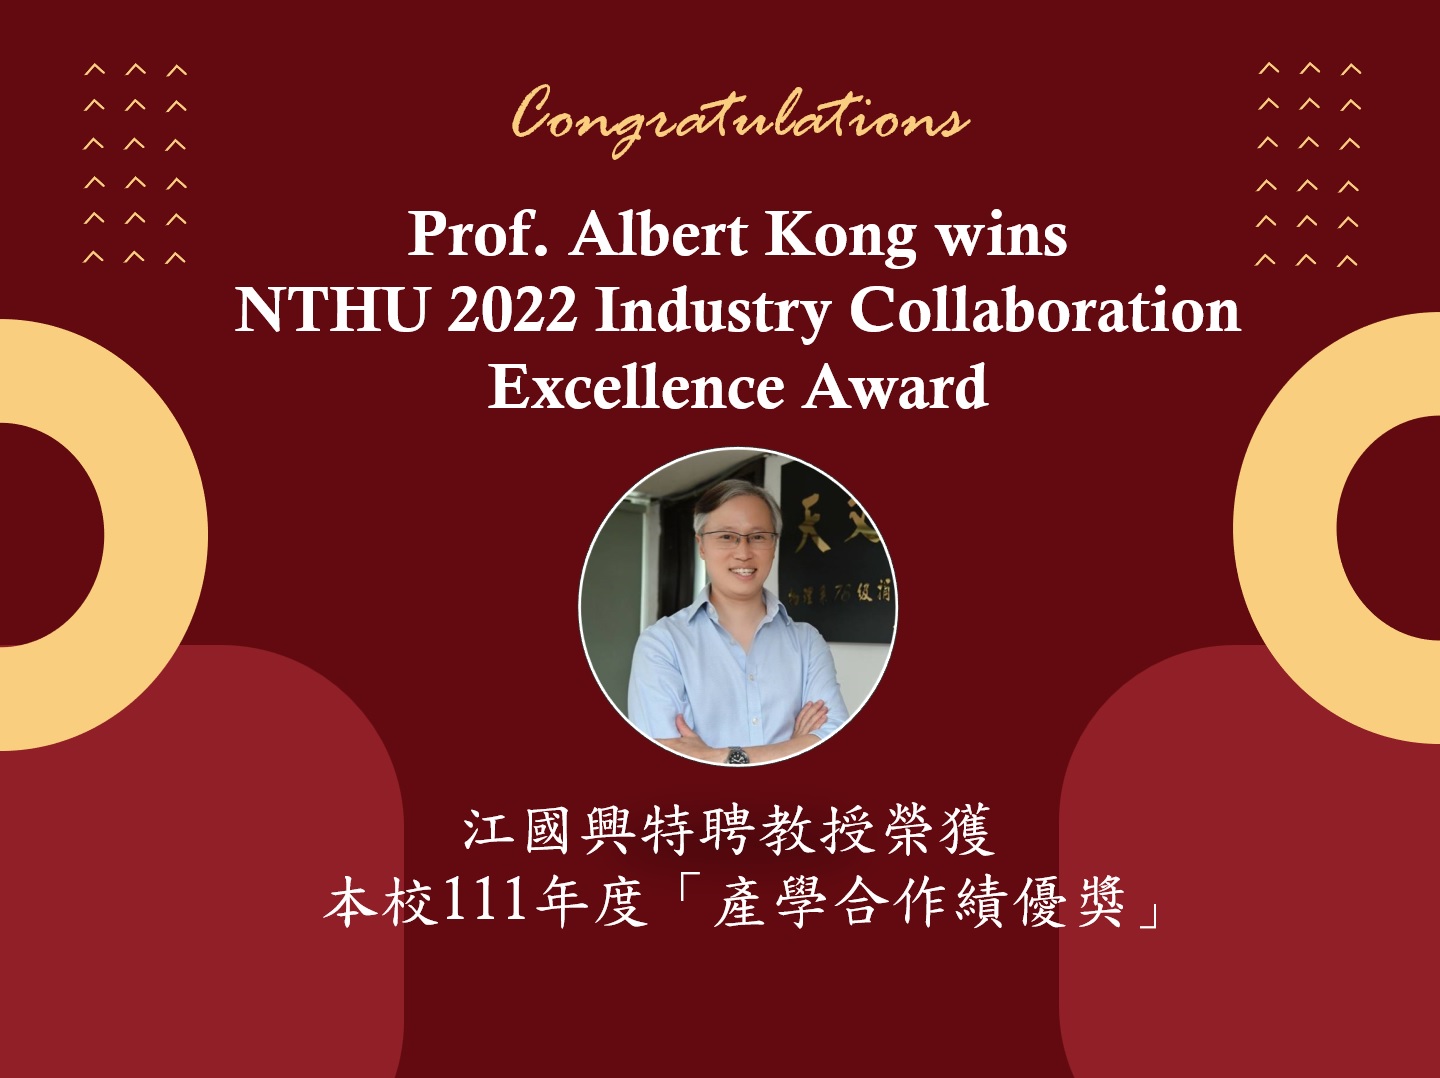 Professor Albert Kong of Astronomy Institute wins NTHU 2022 Industry Collaboration Excellence Award